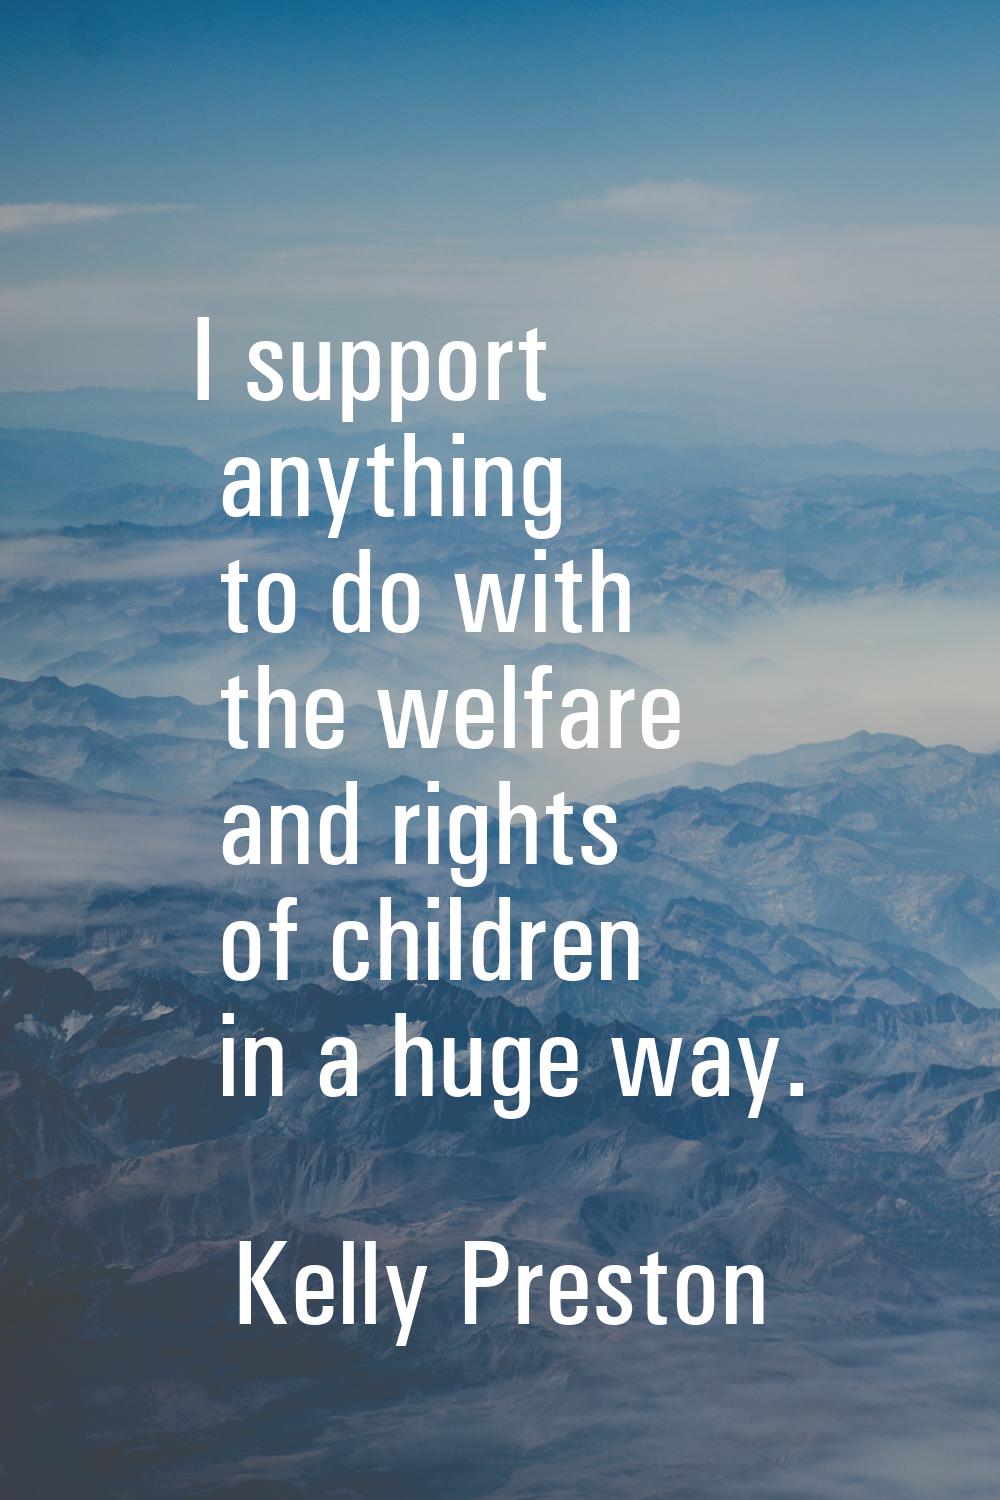 I support anything to do with the welfare and rights of children in a huge way.